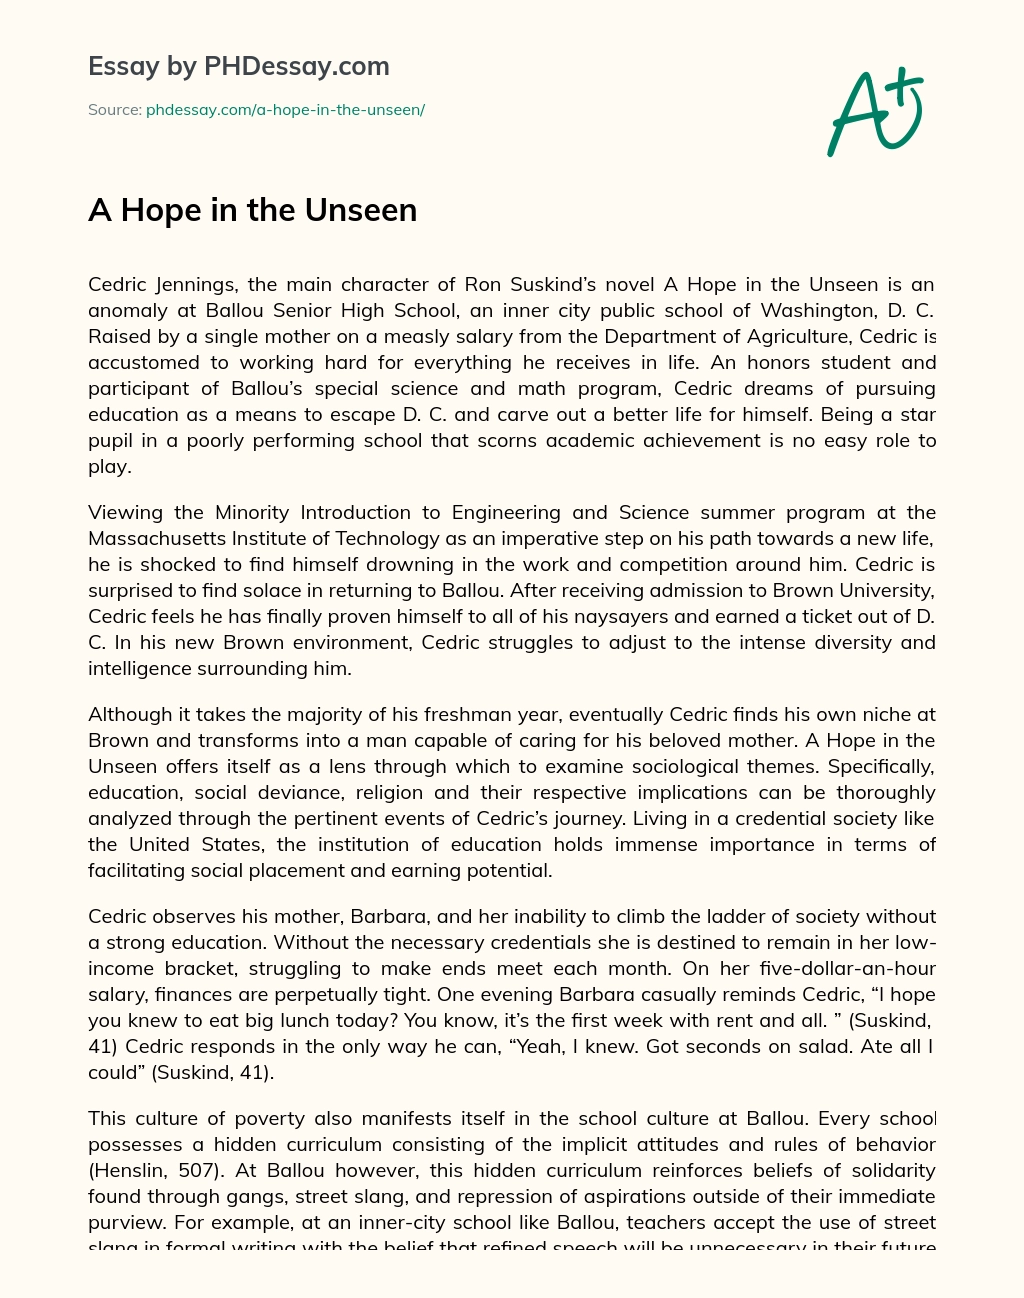 A Hope in the Unseen essay